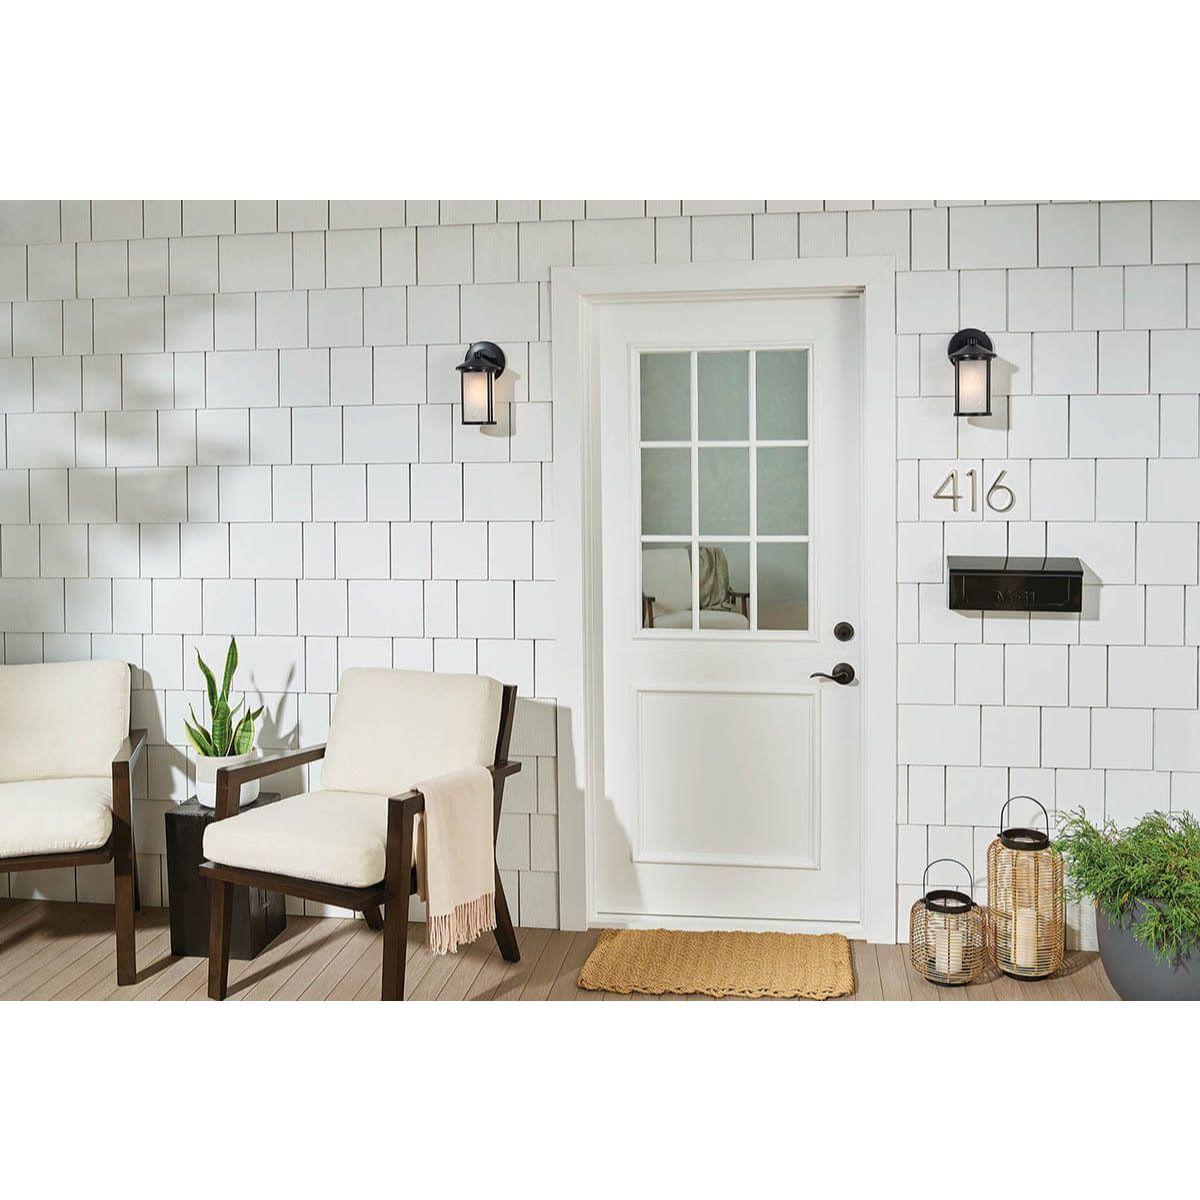 Lombard 11 in. Outdoor Wall Sconce